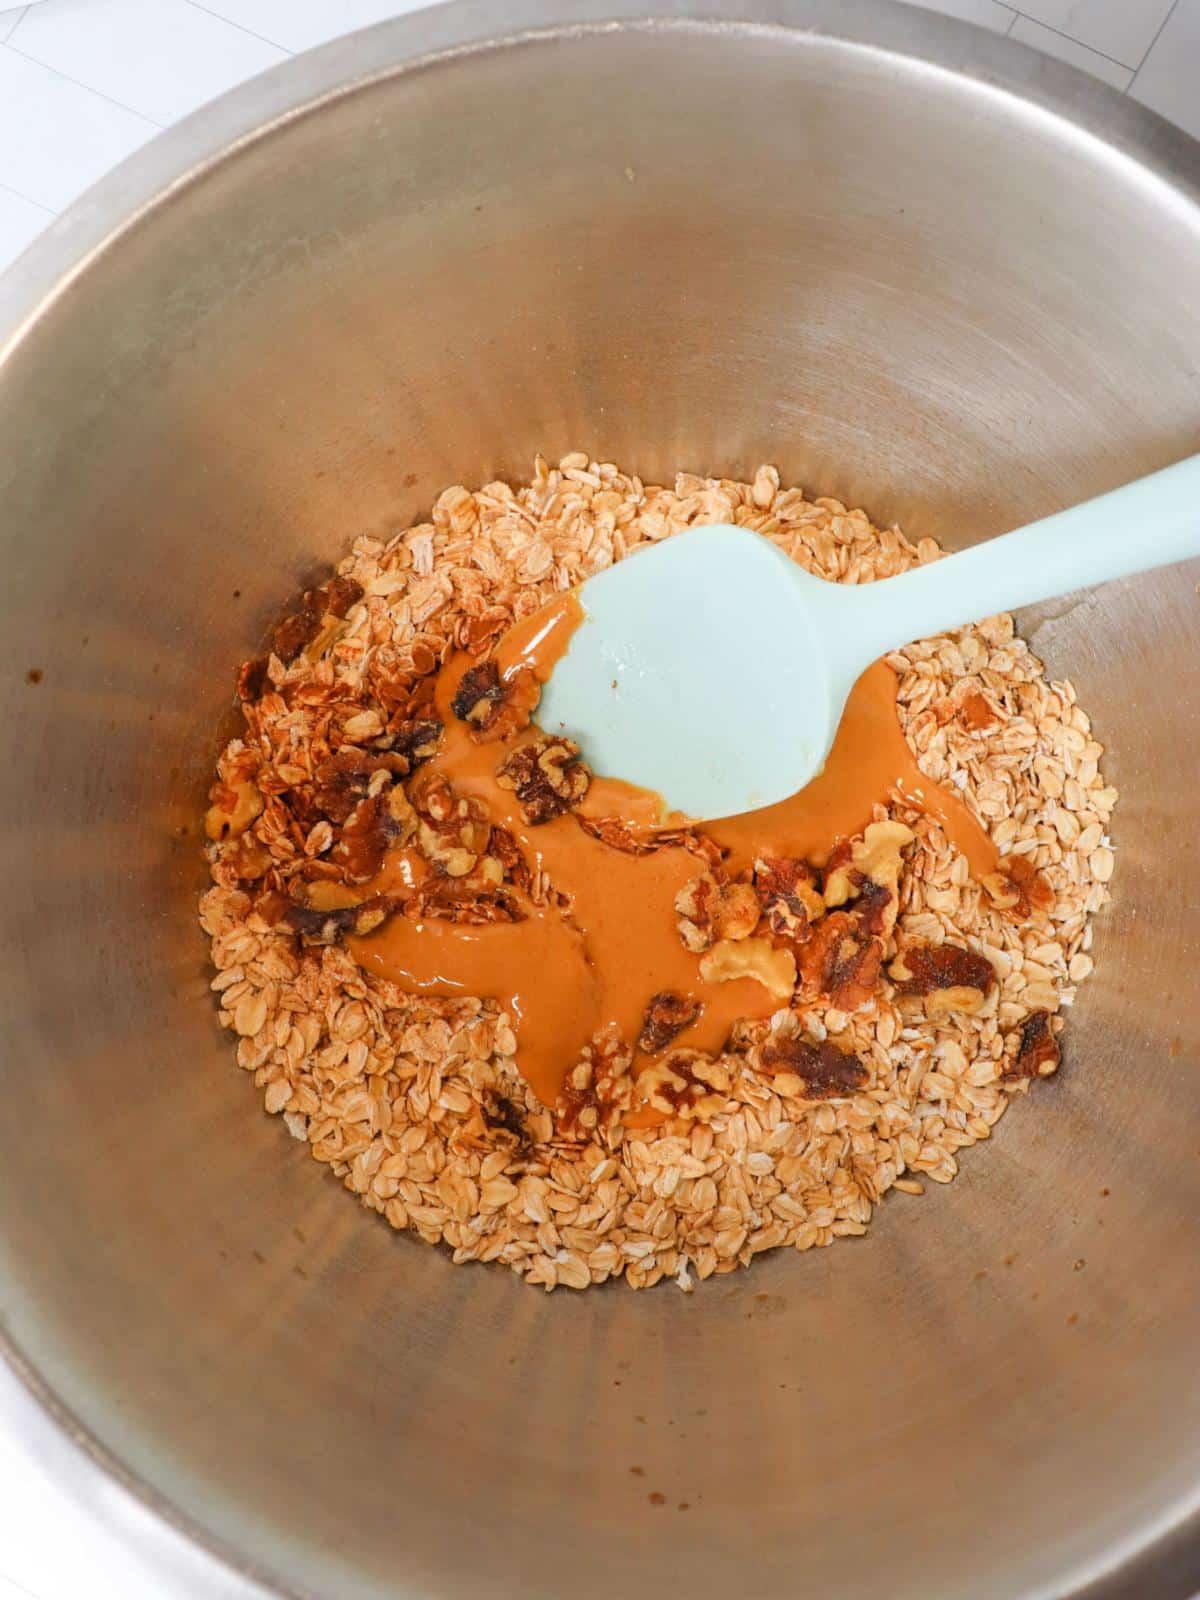 Vegan granola ingredients in a mixing bowl with a rubber spatula.